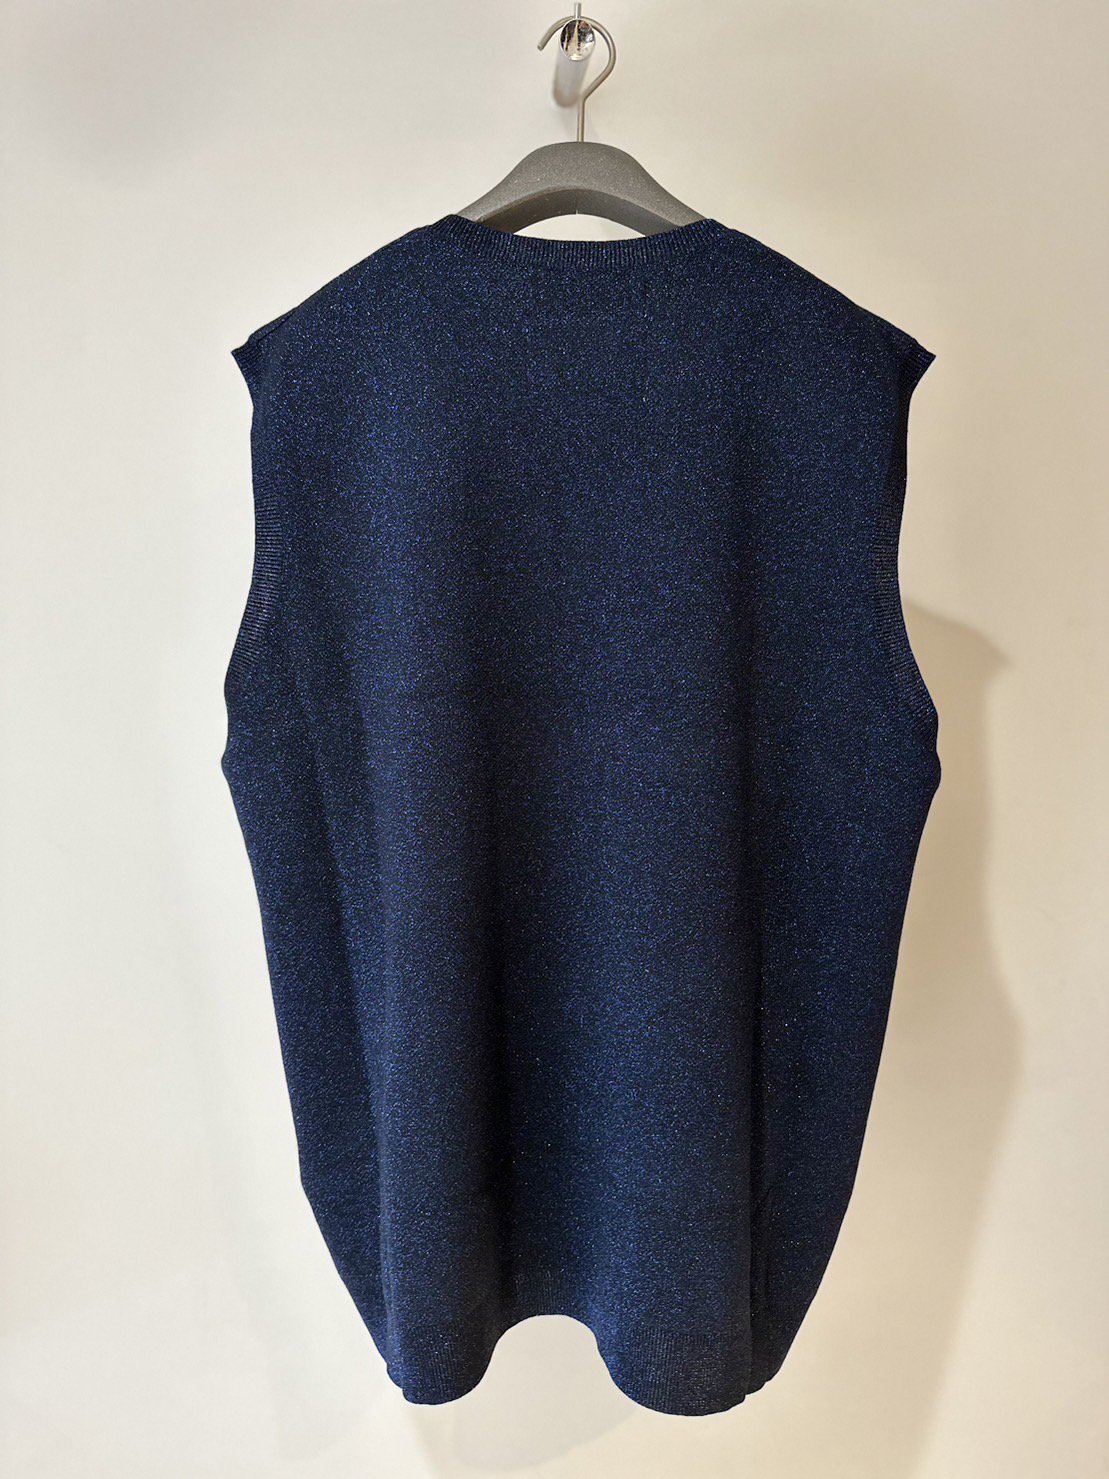 DAIRIKU<br />Oversized Lame Knit Vest / Navy<img class='new_mark_img2' src='https://img.shop-pro.jp/img/new/icons14.gif' style='border:none;display:inline;margin:0px;padding:0px;width:auto;' />